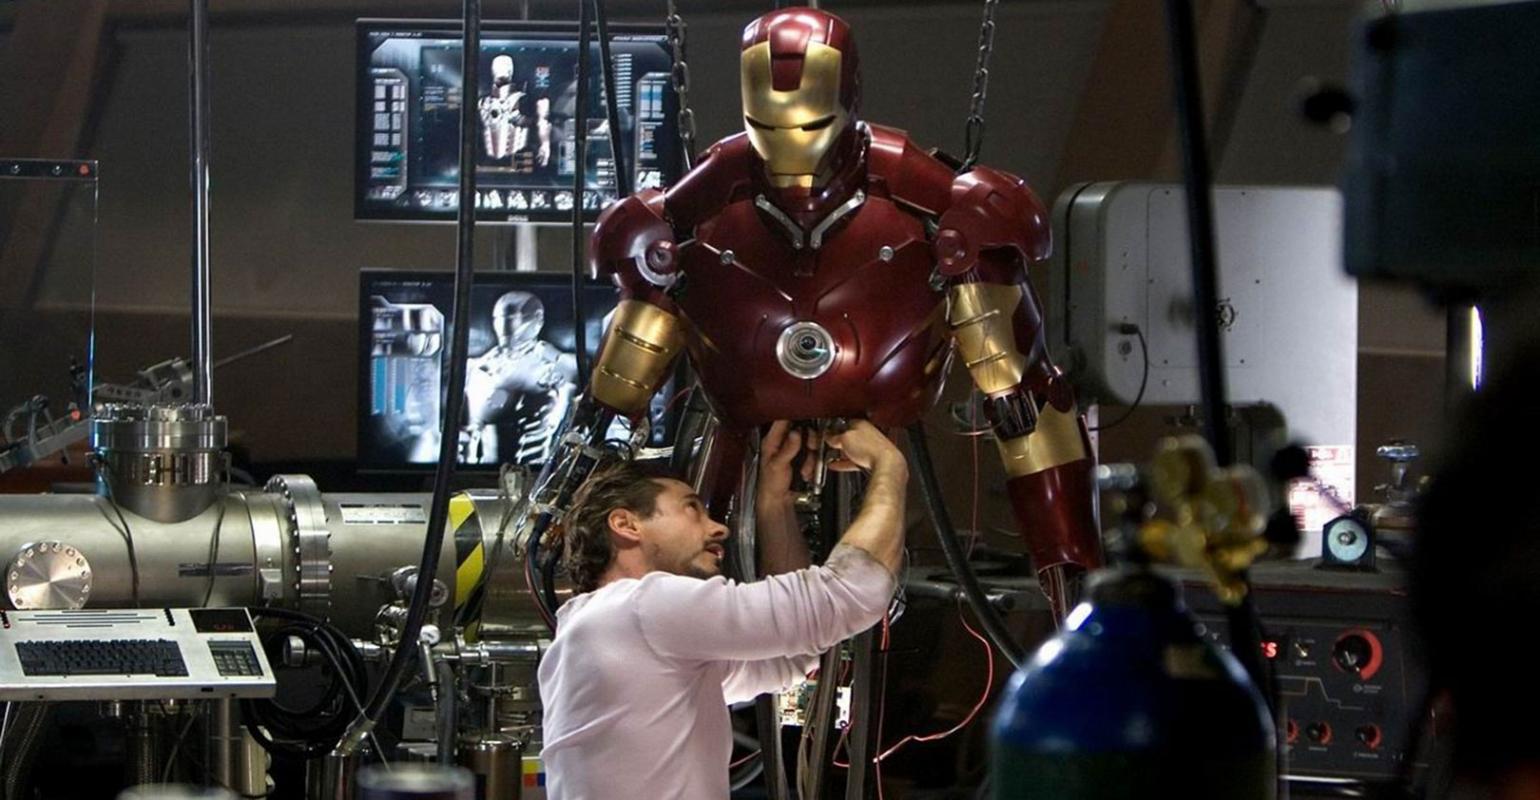 tony stark building the iron man suit in his workshop